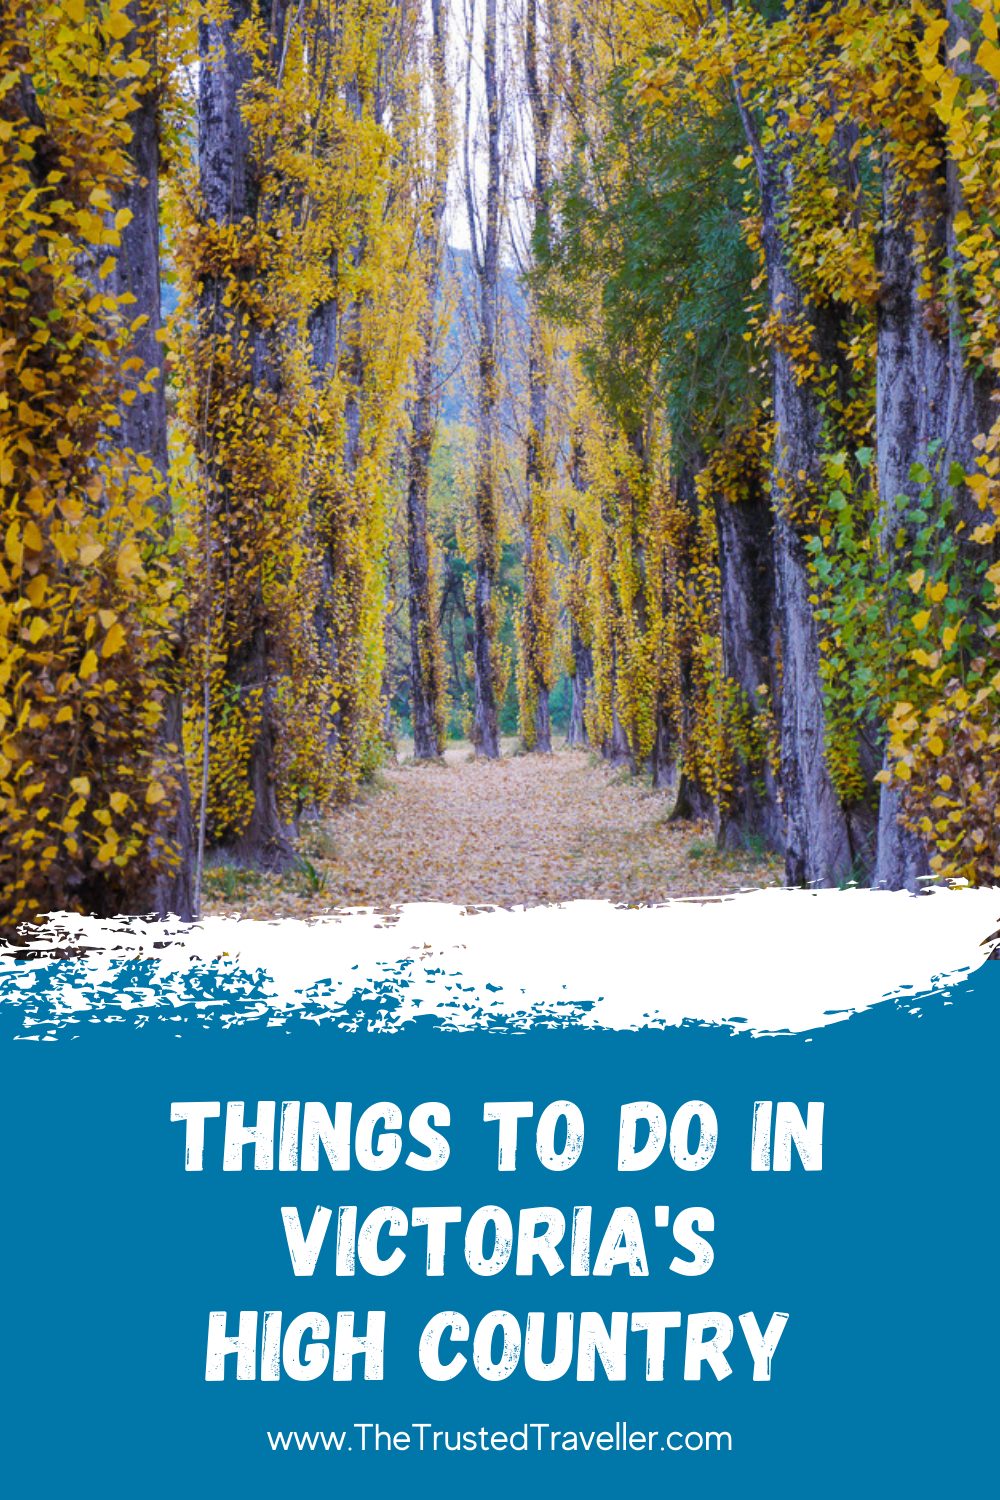 Things to Do in Victoria's High Country - The Trusted Traveller